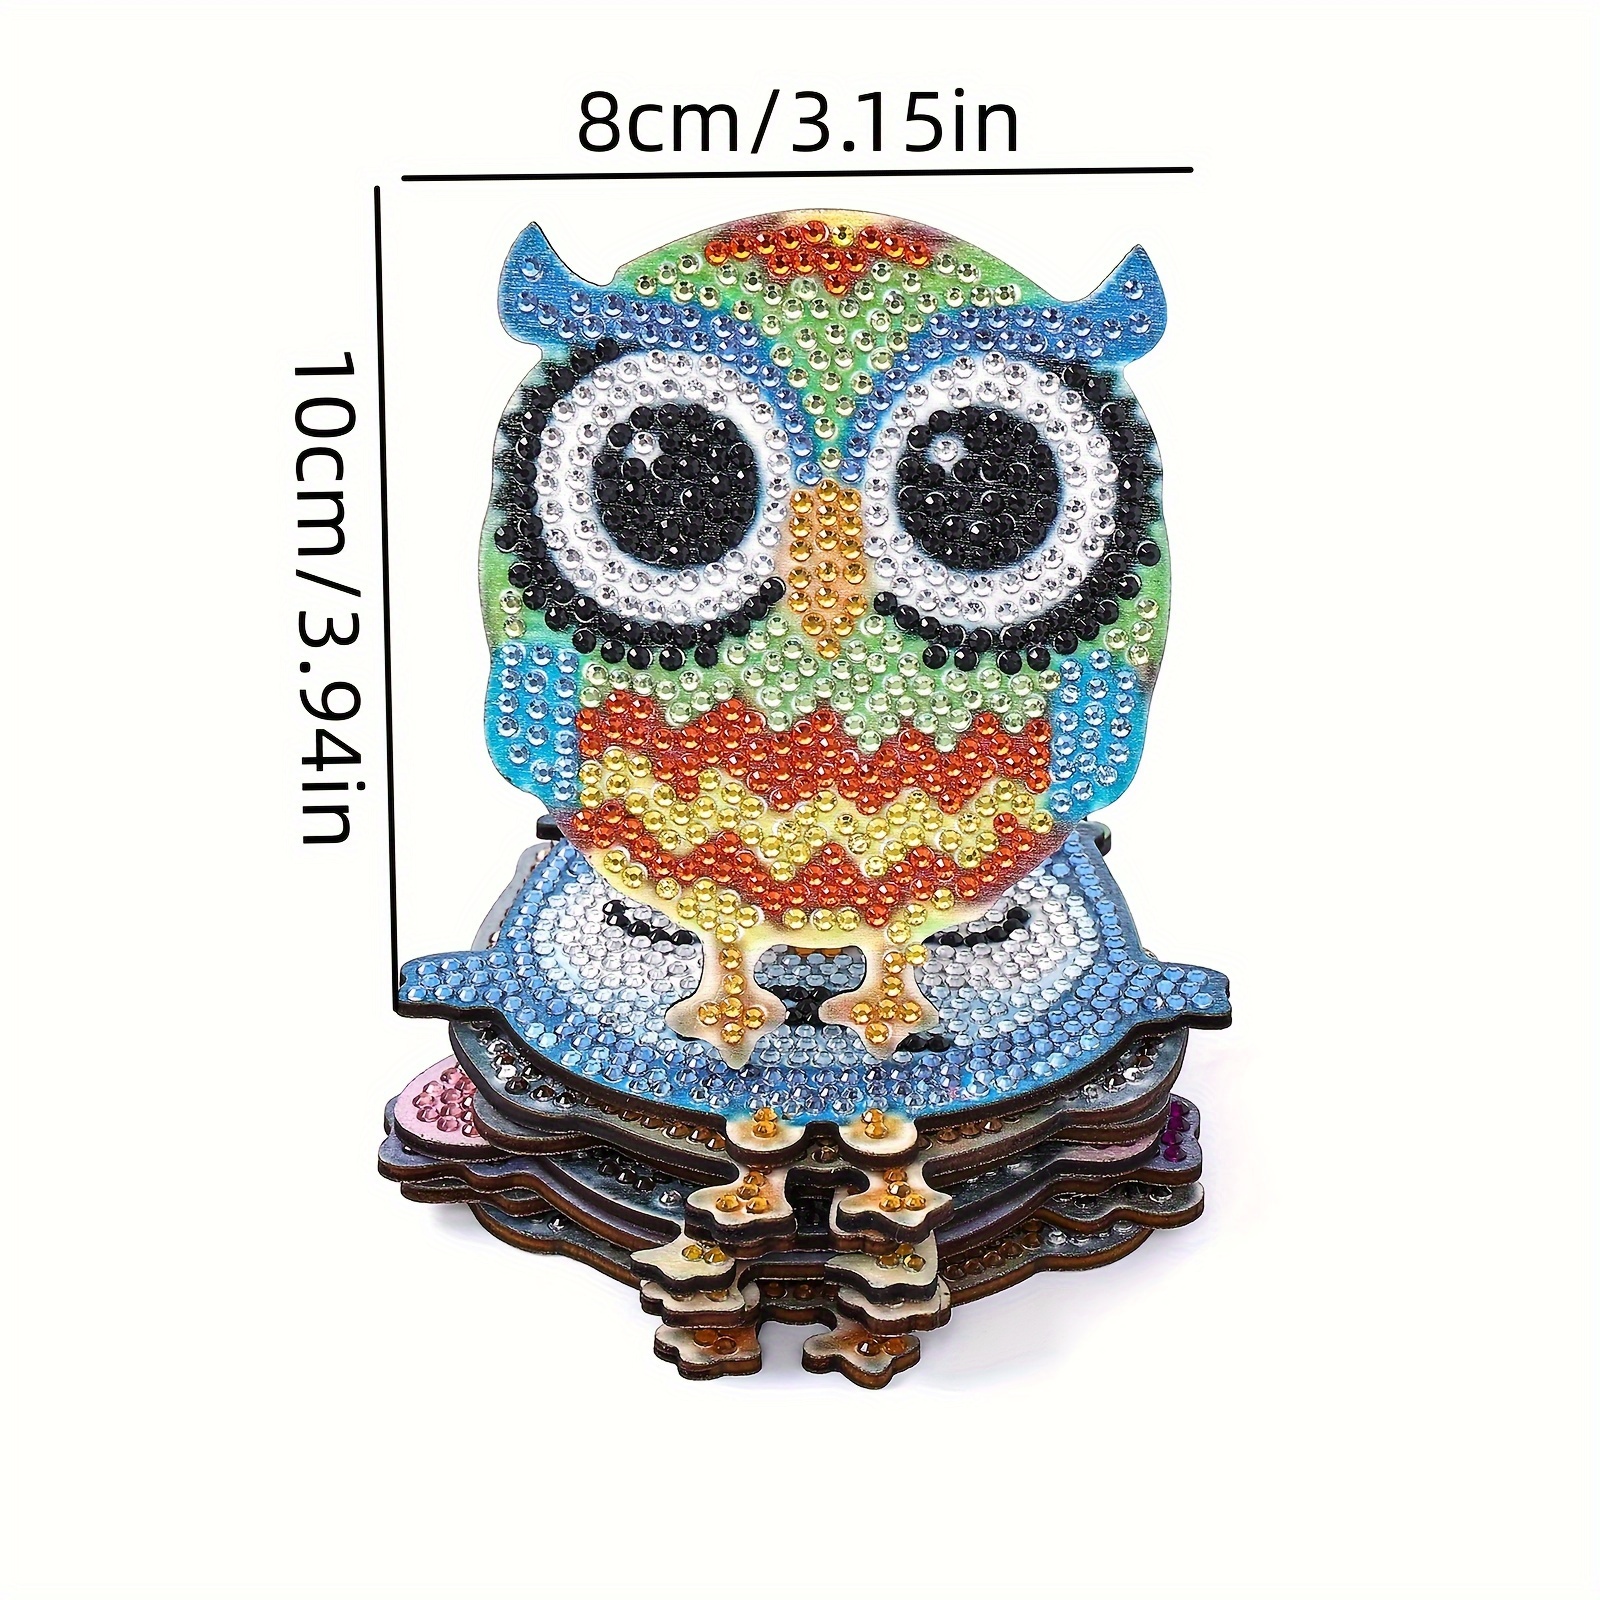 10pcs 10x10cm/3.94x3.94in Owl Shaped Diamond Painting Coasters Set, DIY Owl  Diamond Painting Coasters, With Holder, Art Craft Supplies For Beginners